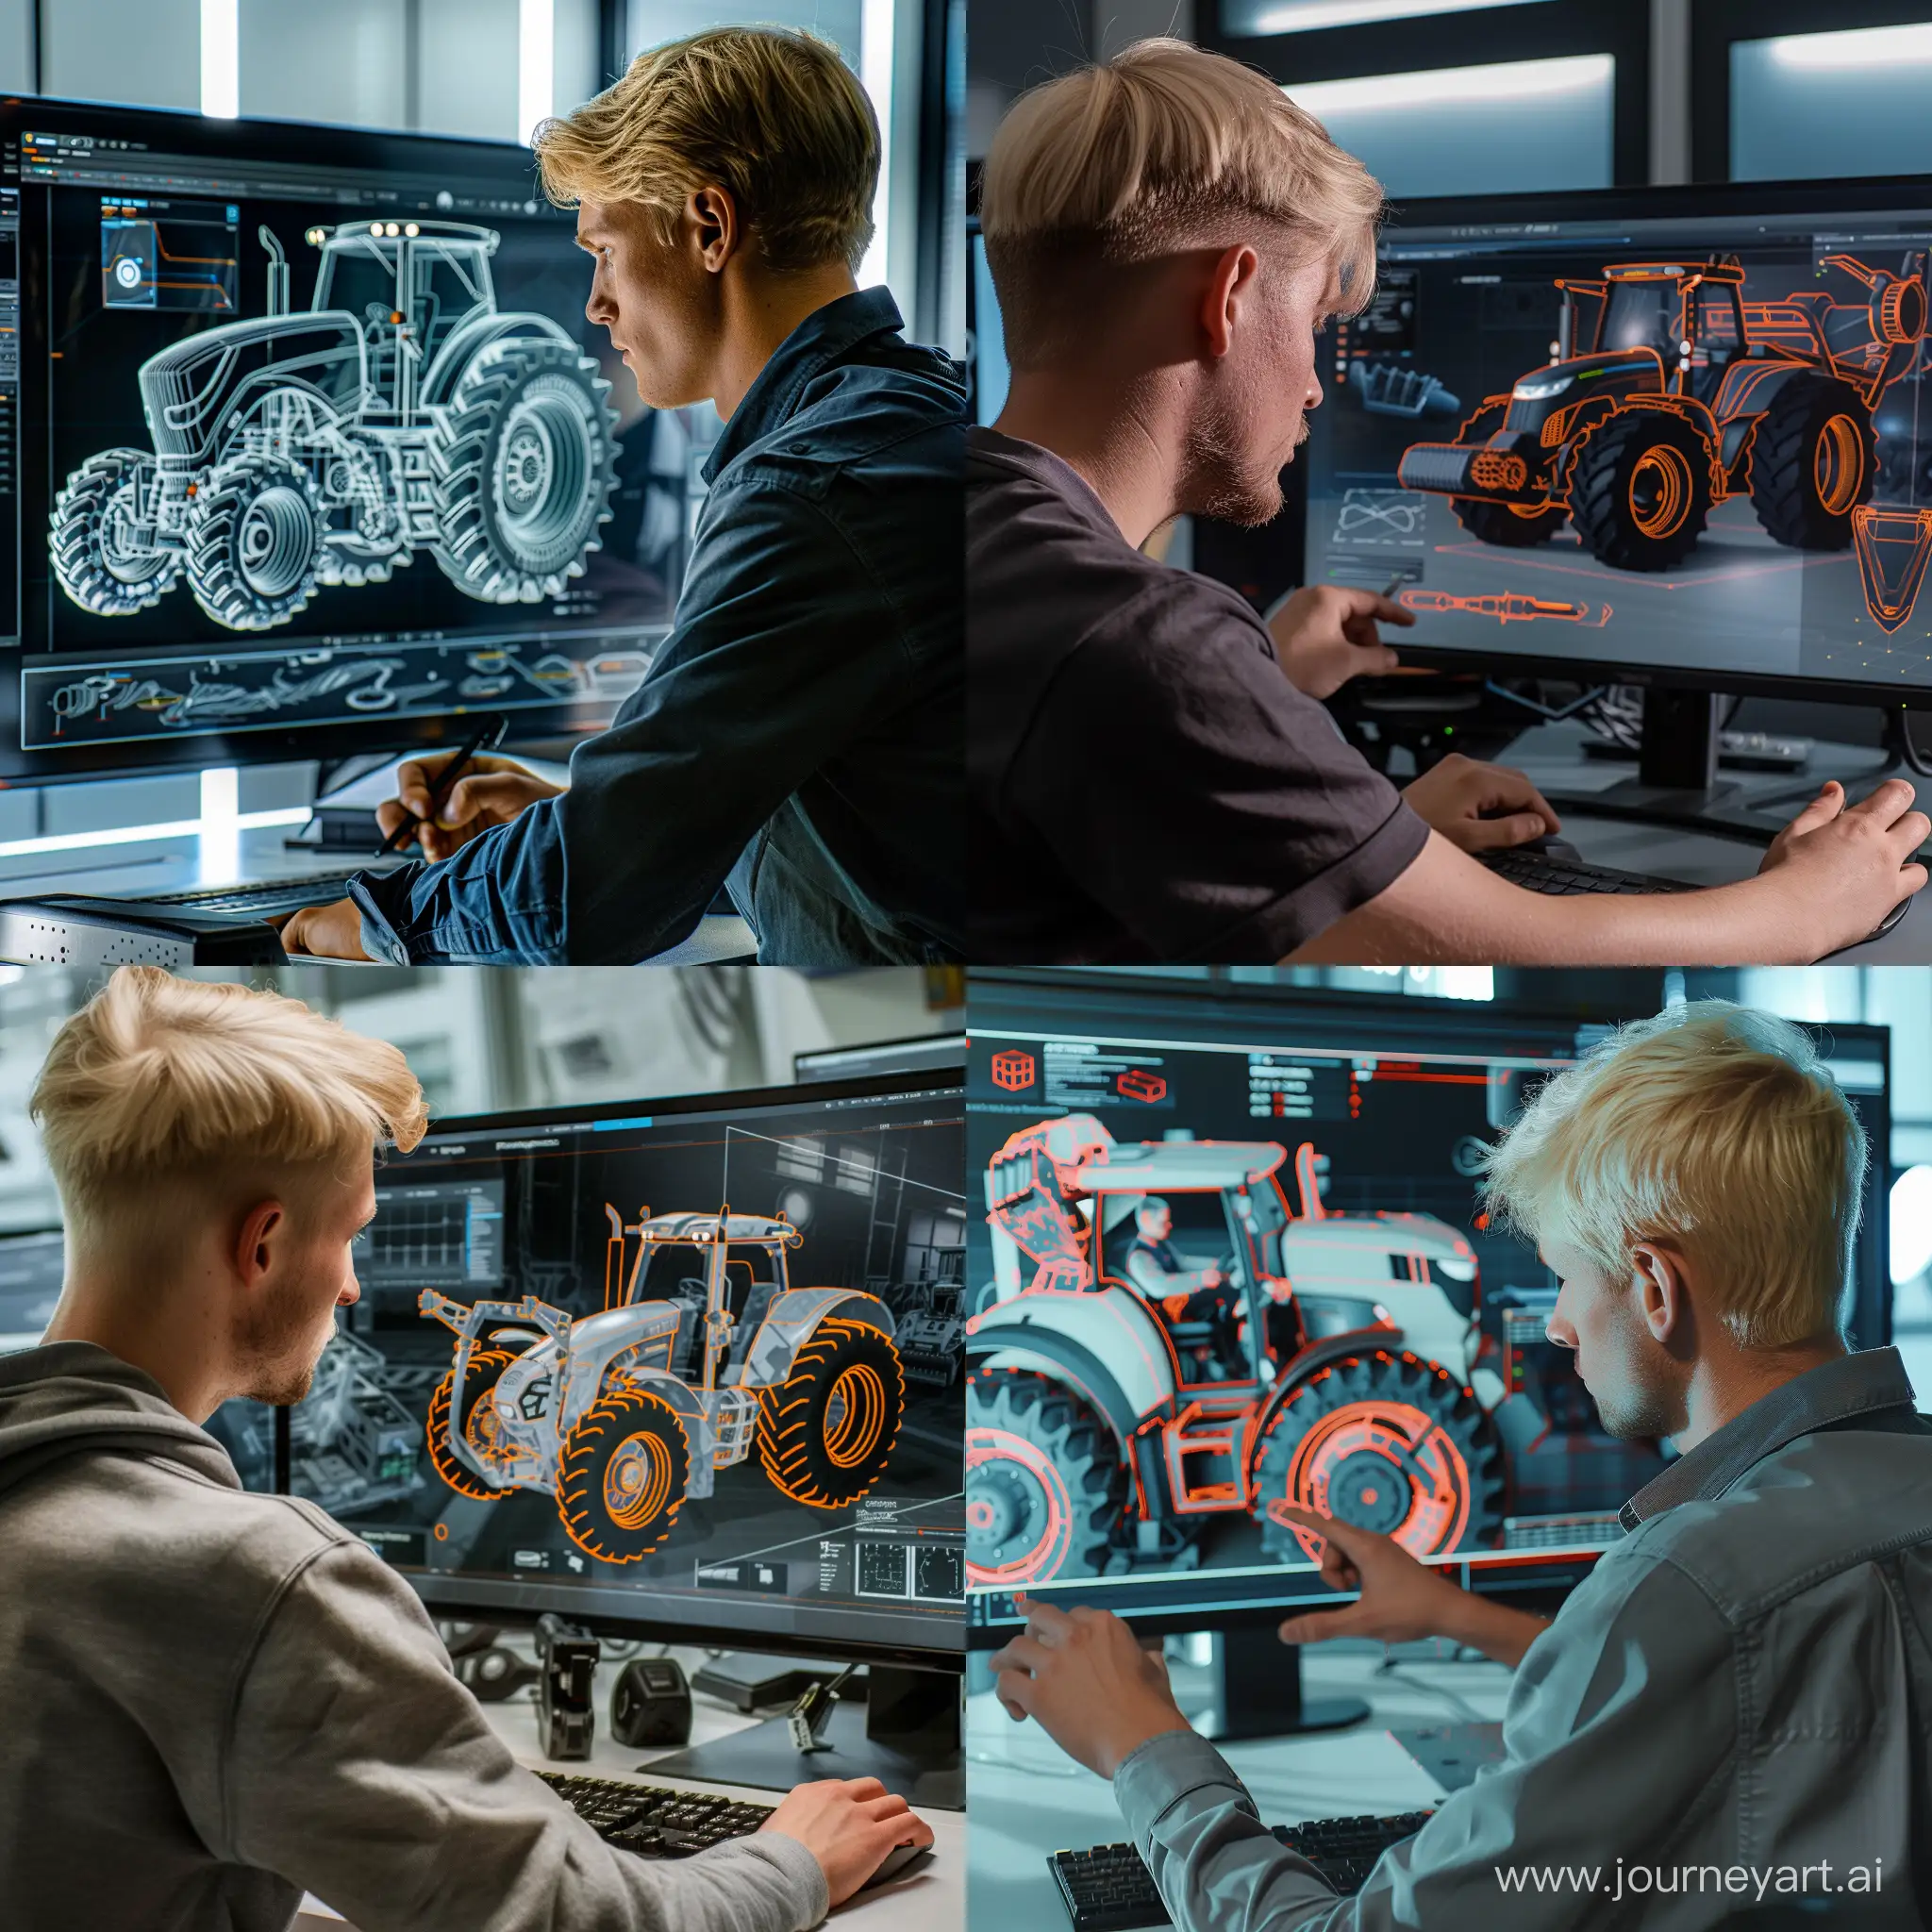 A male engineer with blond hair is working on the design of a virtual tractor "scout TC-1304C" using modern technology in the style of the movie "Iron Man"